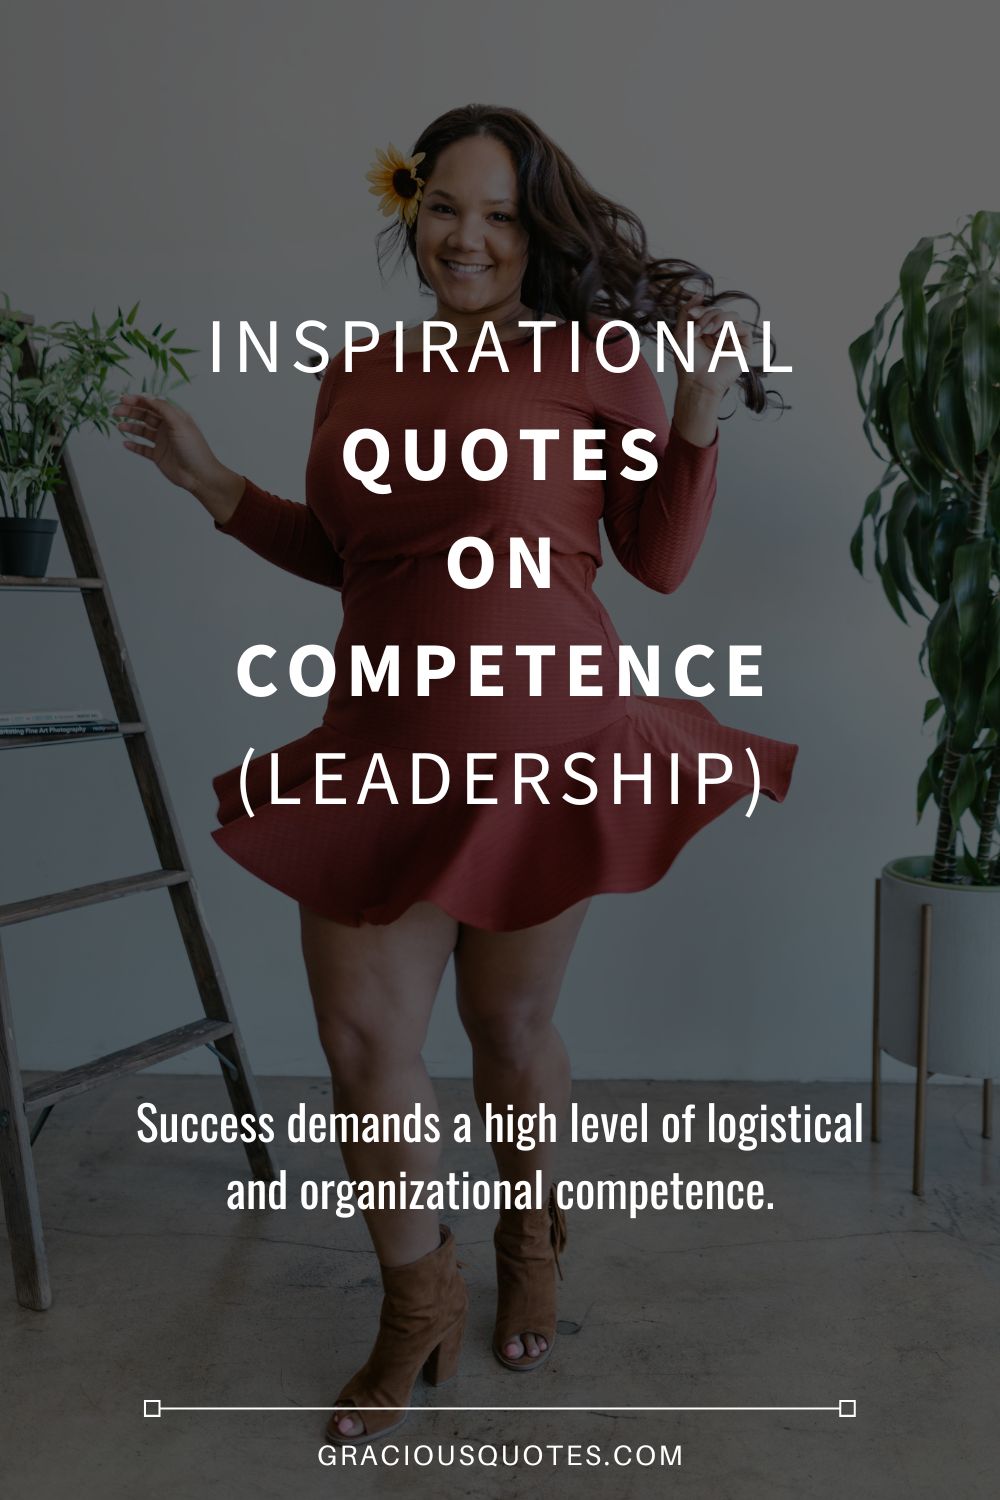 Inspirational Quotes on Competence (LEADERSHIP) - Gracious Quotes